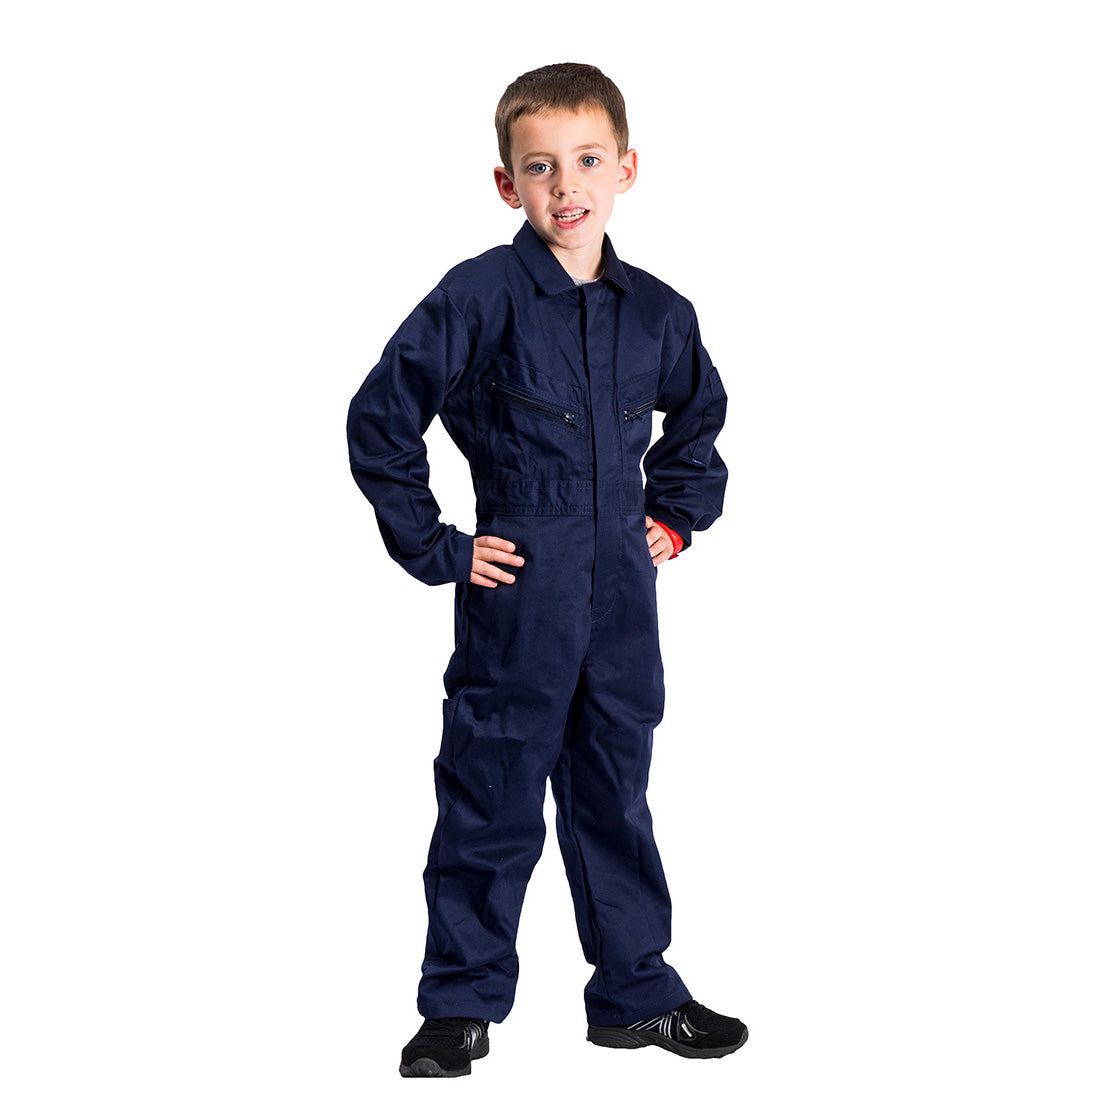 Portwest C890 Youth's Coverall Navy Size 6